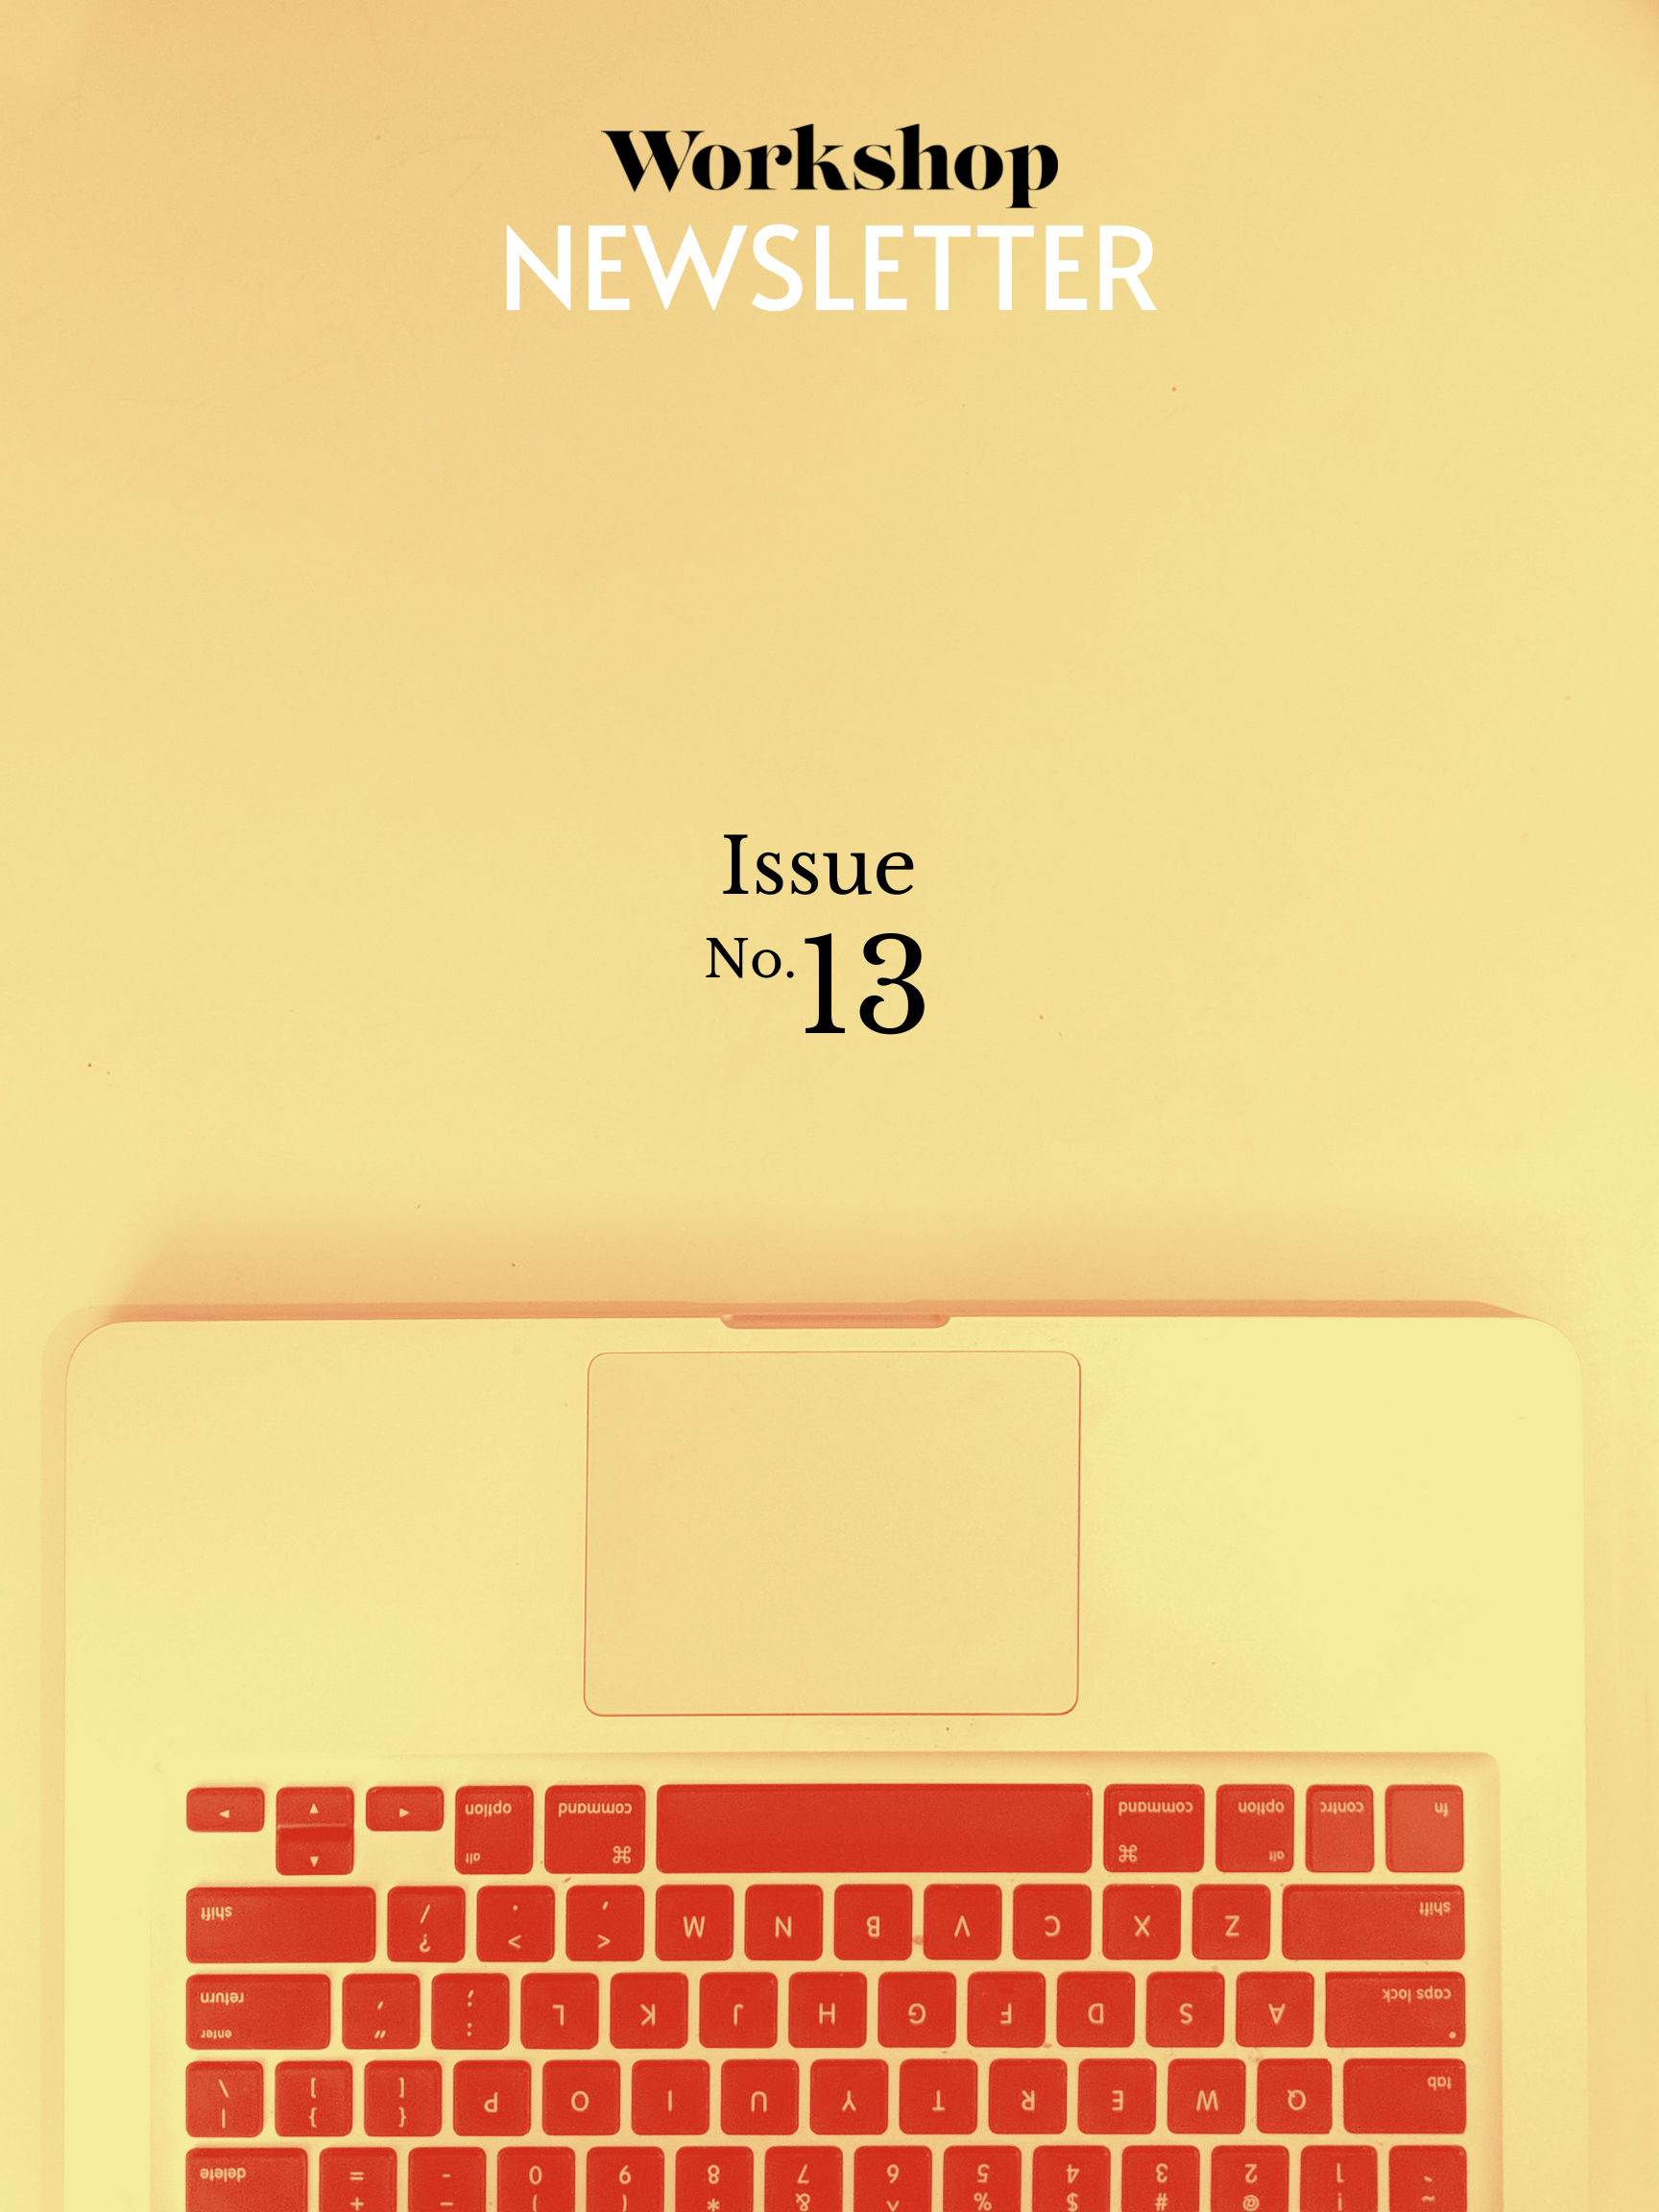 A laptop overlaid in yellow with the words "Workshop newsletter issue no. 13"